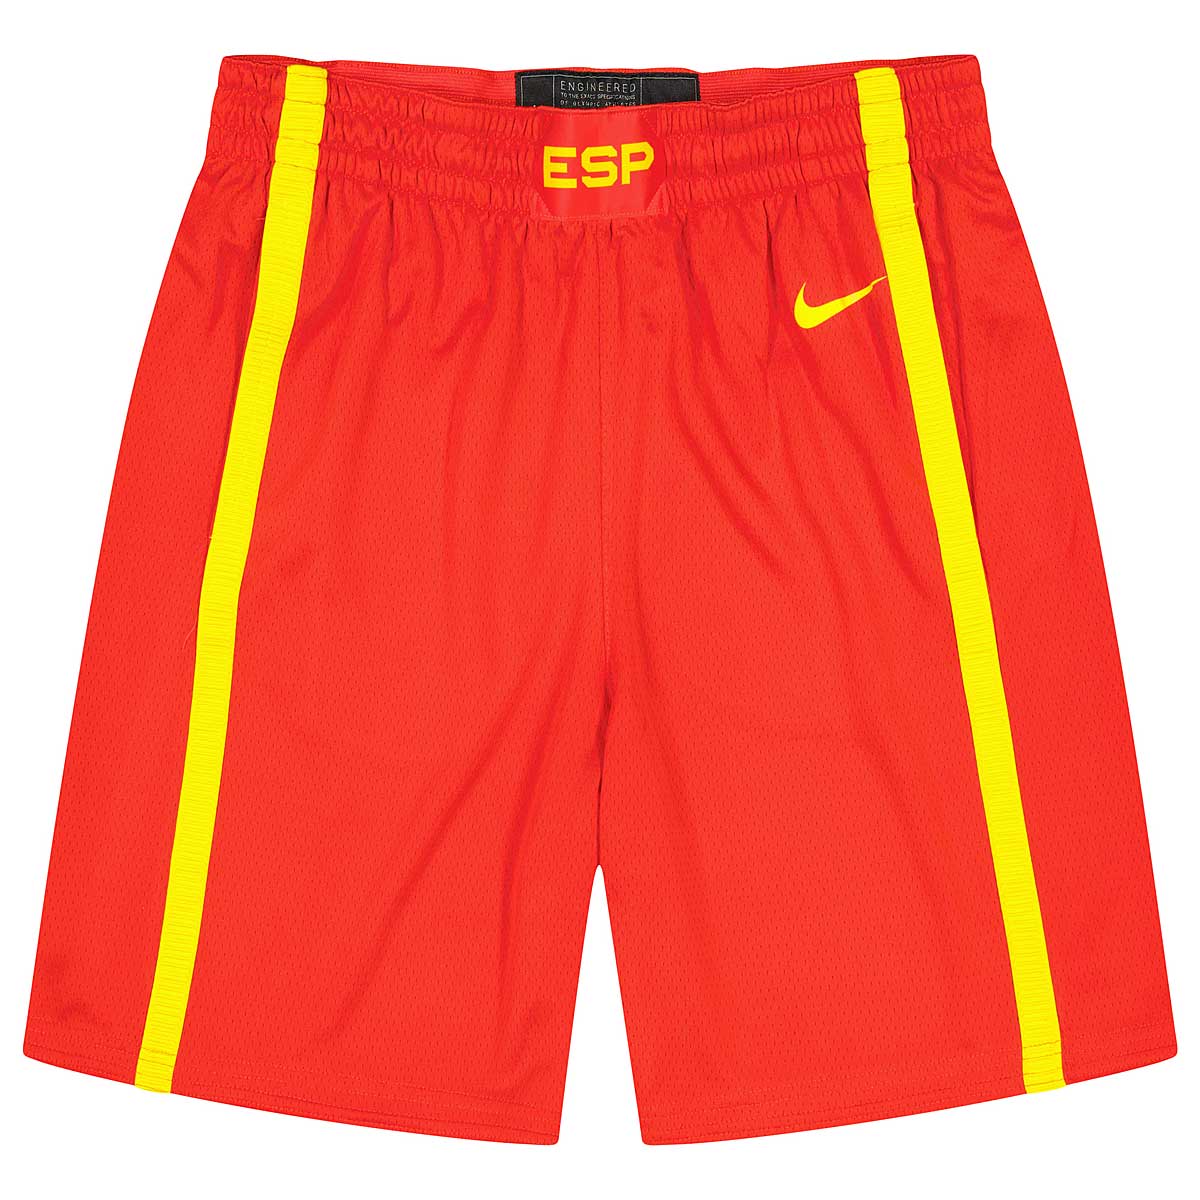 Image of Nike Spain Basketball Road Shorts, Challenge Red/Midwest Gold, Male, Basketball Shorts, CQ0195-600